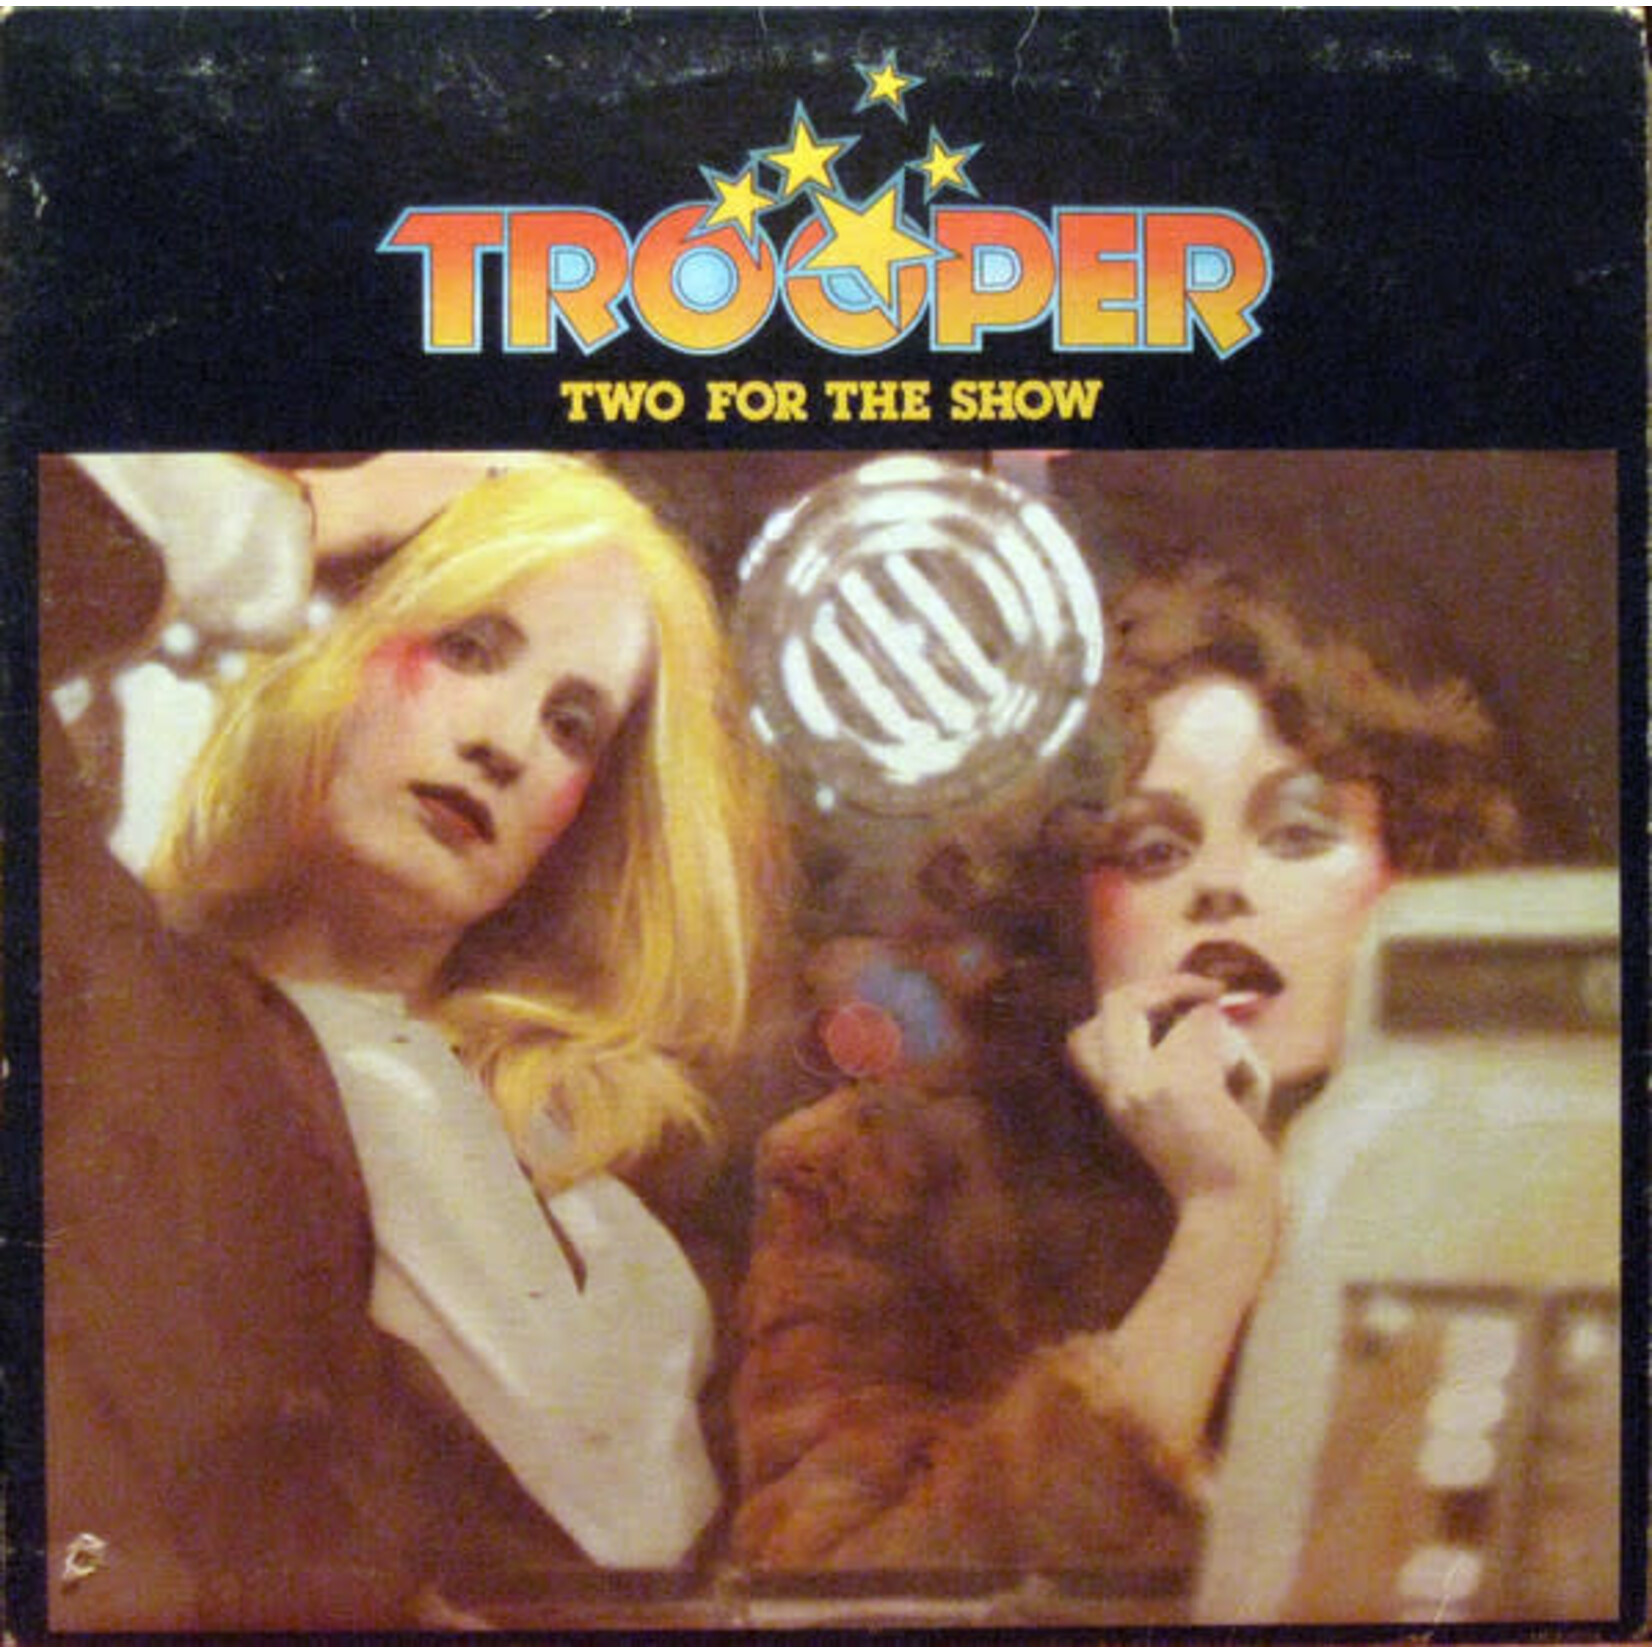 Trooper Trooper – Two For The Show (G, 1975, LP, MCA-2214, Canada)